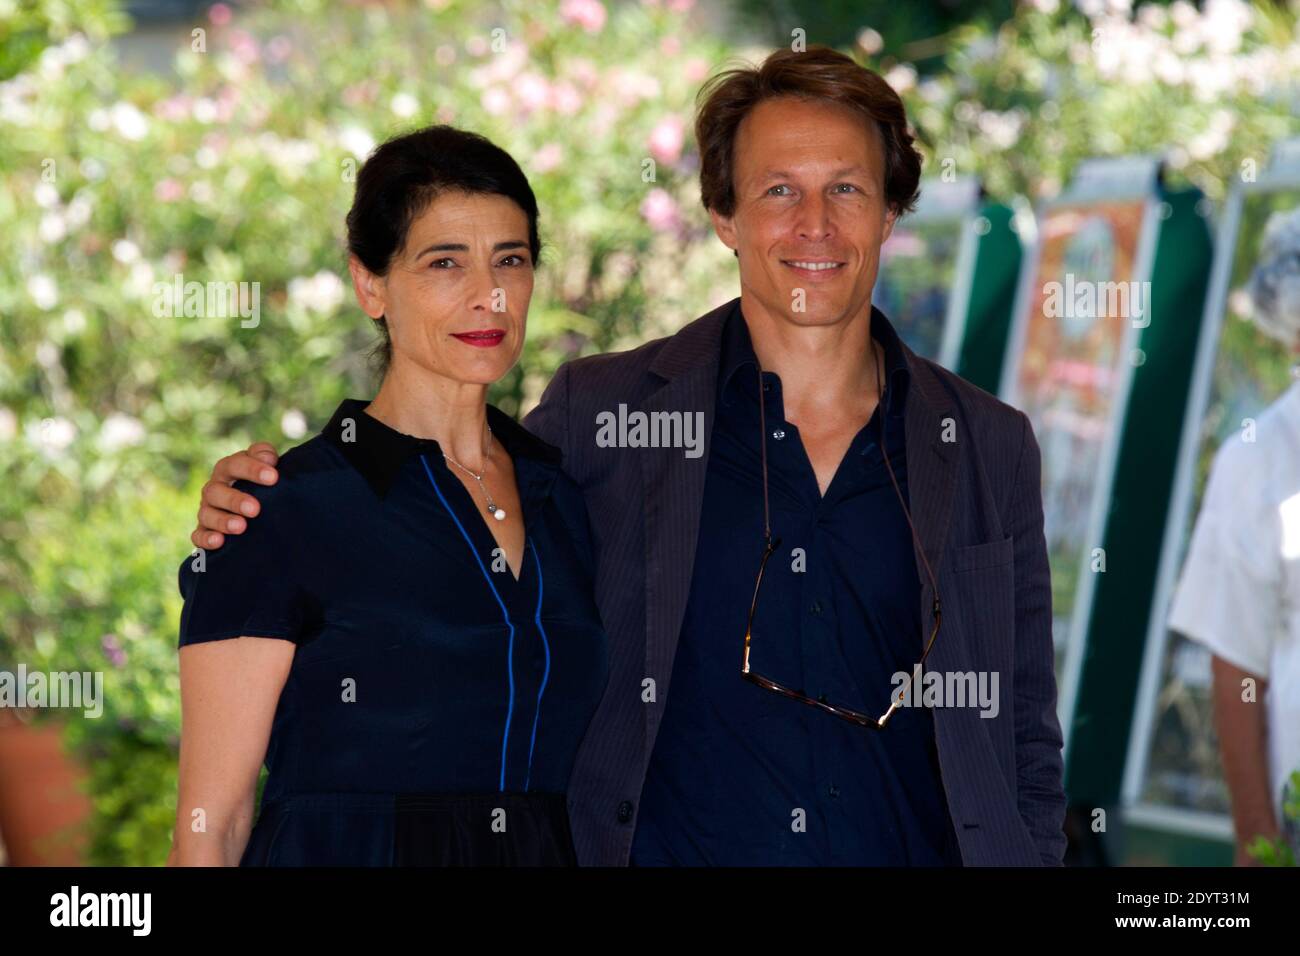 Hiam Abbass and Roberto Zibetti arriving at the Excelsior Hotel during the 70th Venice International Film Festival Mostra, at Lido island in Venice, Italy on August 30, 2013. Photo by Aurore Marechal/ABACAPRESS.COM Stock Photo